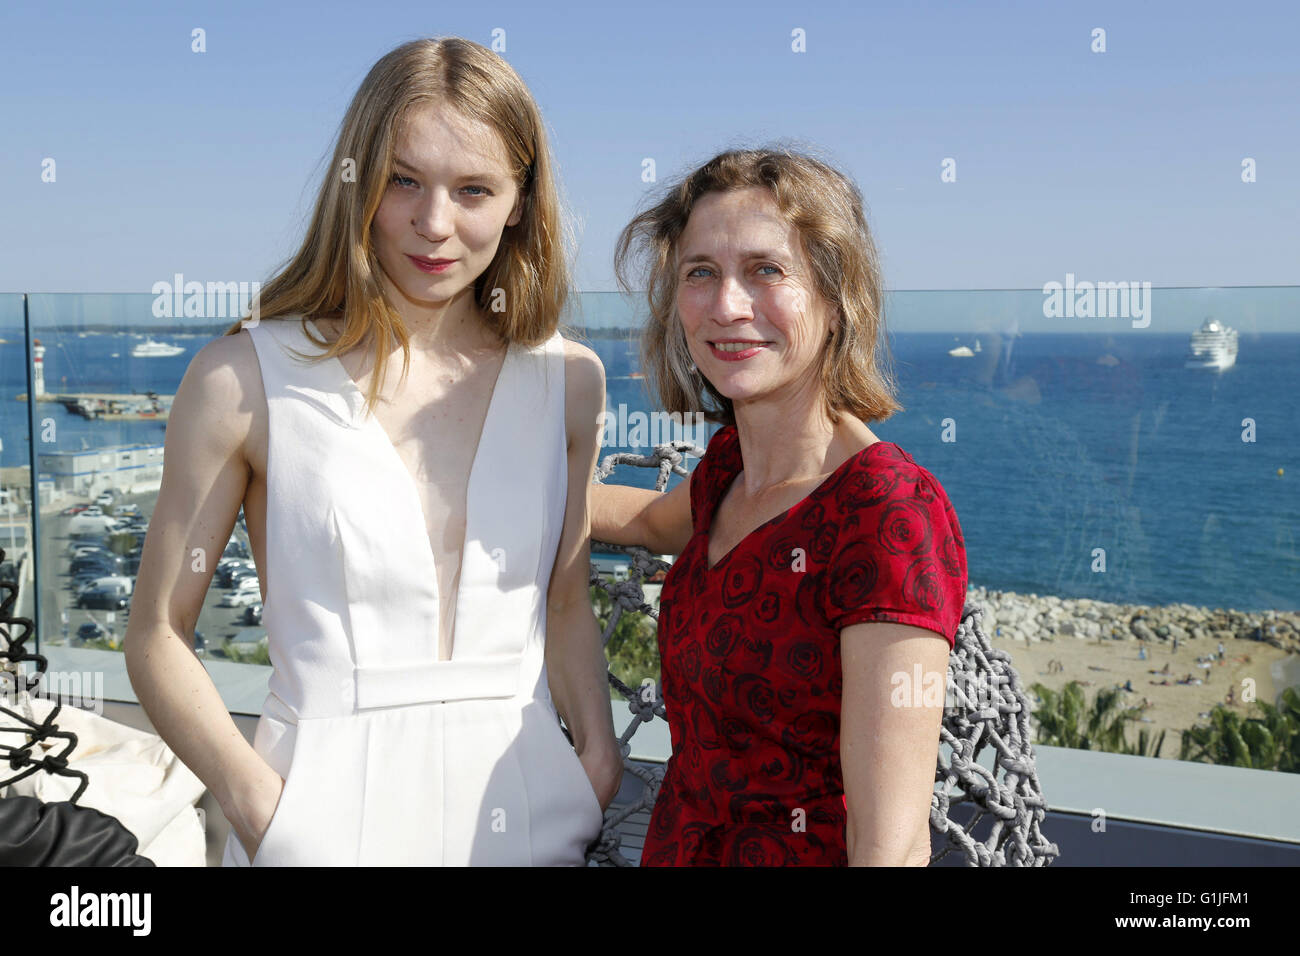 Lilith Stangenberg and Mariette Rissenbeek attending the NRW Reception during the 69th Cannes Film Festival at the roof terrace of Radisson Blu Hotel on May 15, 2016 in Cannes, France. | usage worldwide/picture alliance Stock Photo